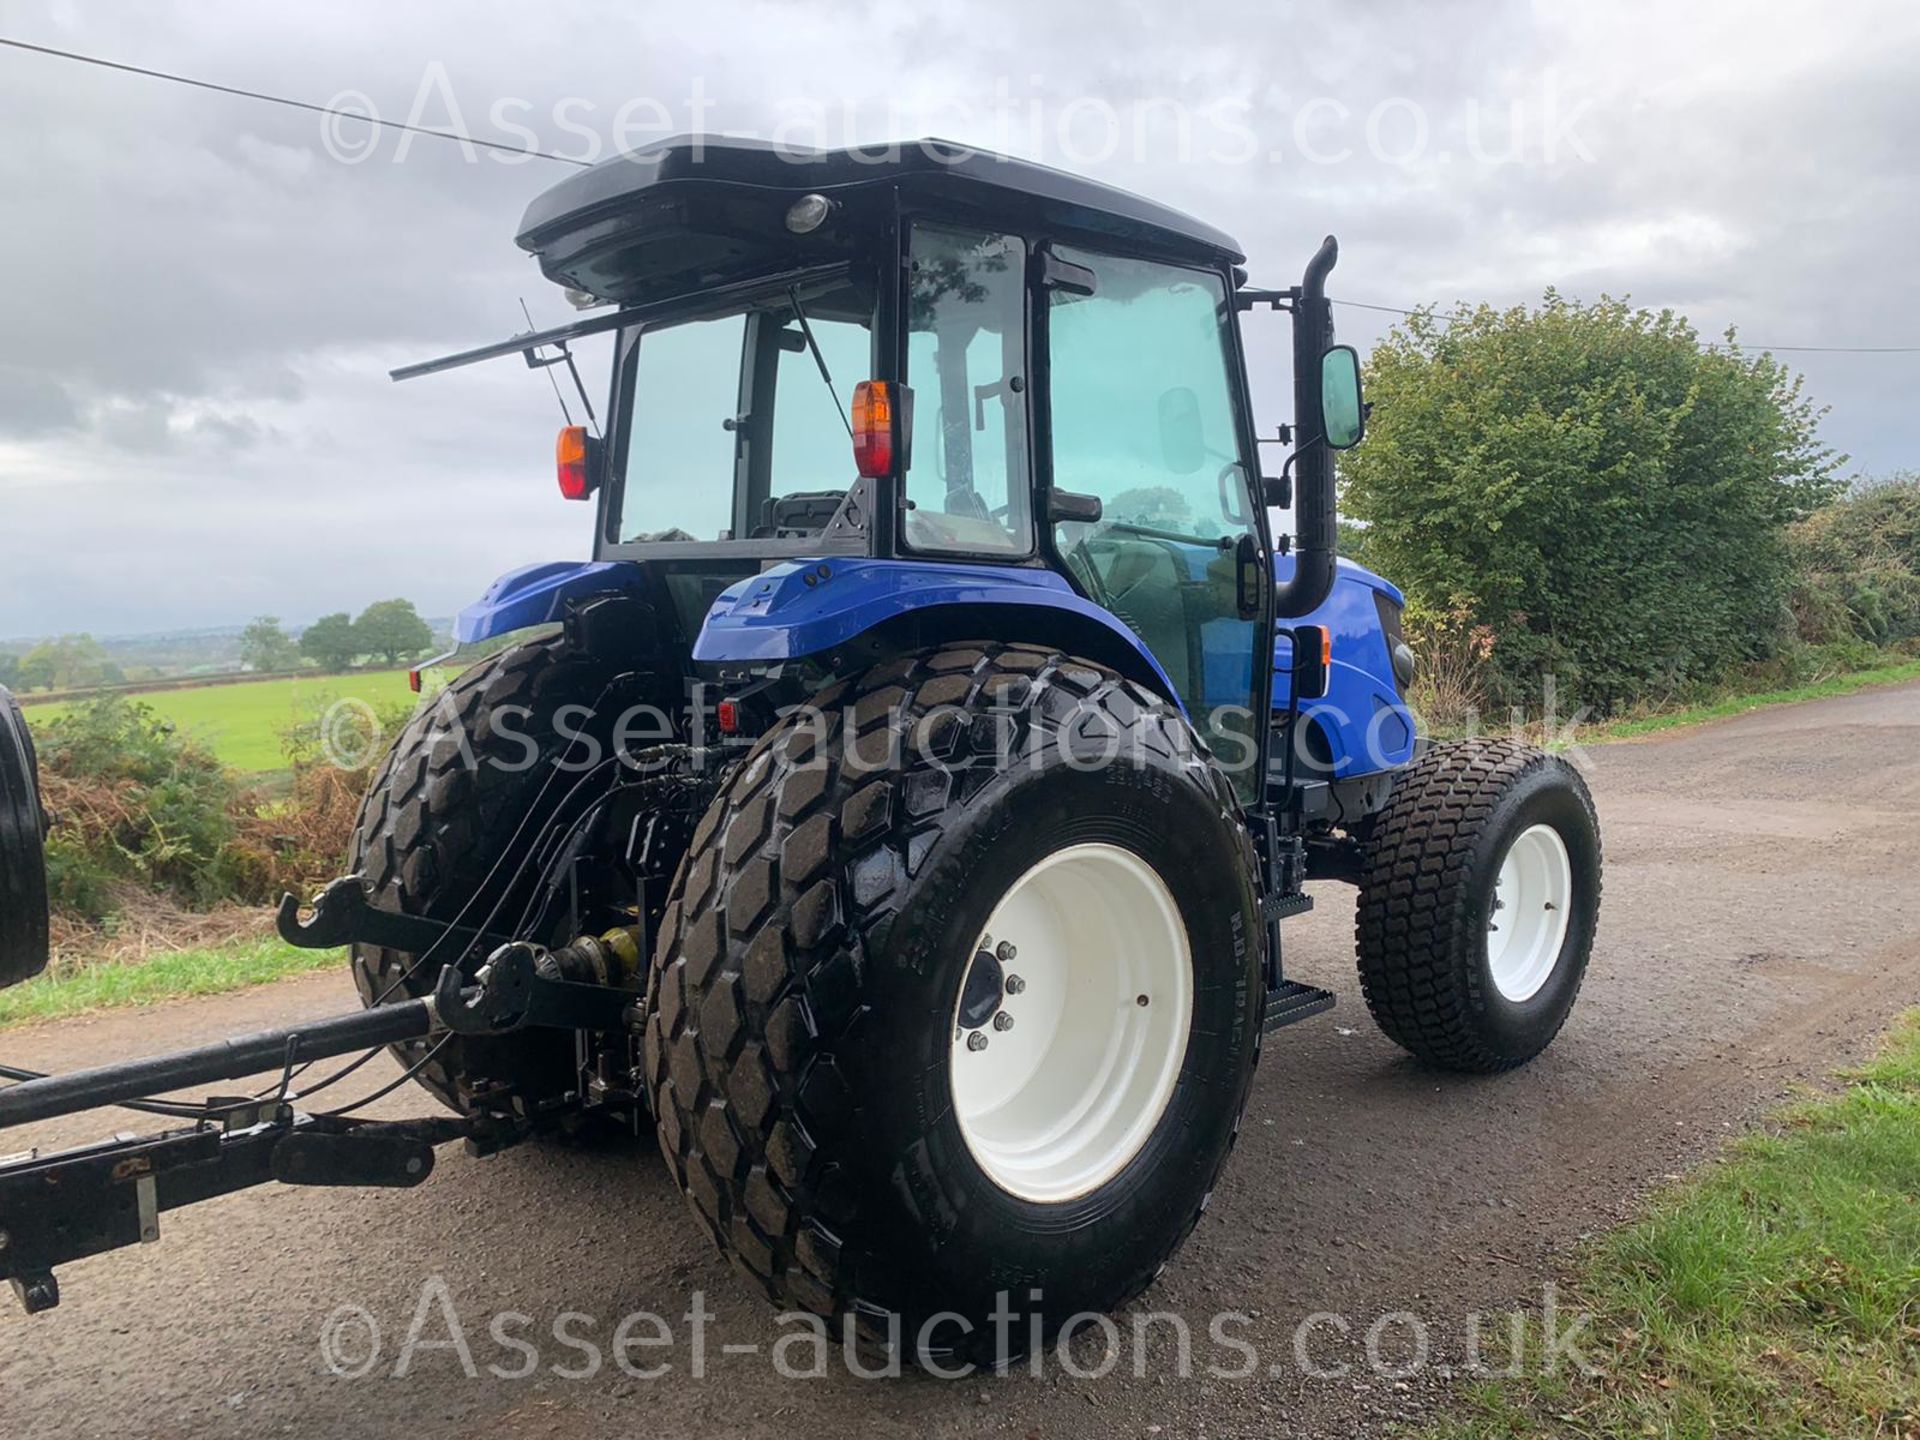 2014 ISEKI TJA8080 86hp 4WD TRACTOR, RUNS DRIVES AND WORKS, SHOWING A LOW AN GENUINE 960 HOURS - Image 7 of 20